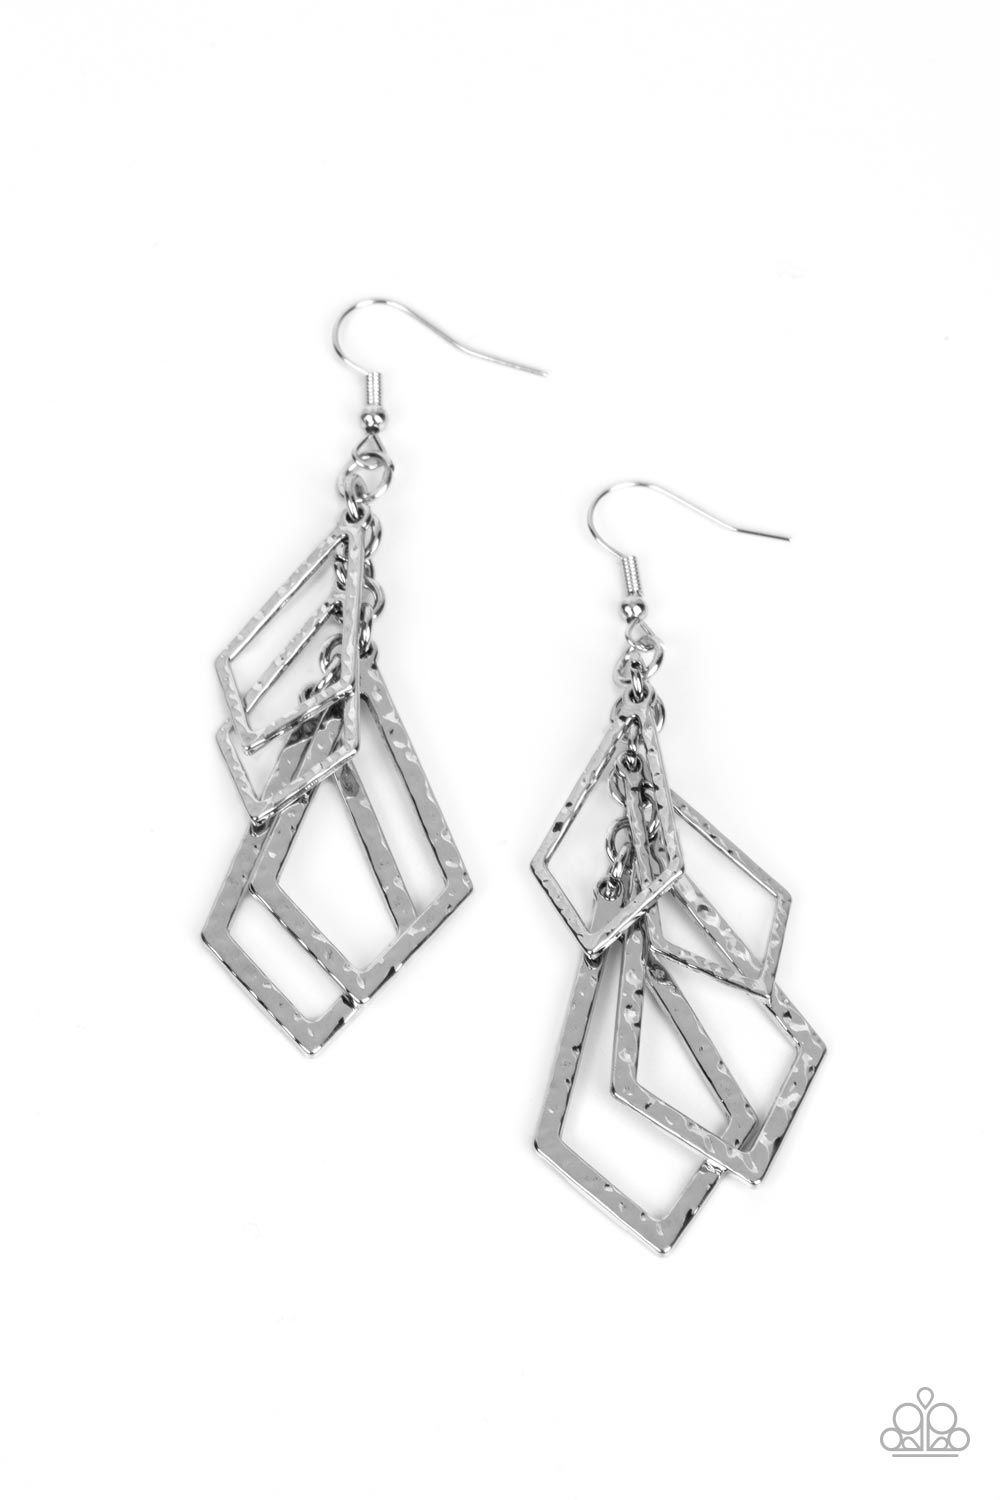 Totally TERRA-ific - Silver Earrings - Paparazzi Accessories - Hammered trapezoidal silver frames trickle from a dainty silver chain, cascading into an edgy geometric tassel. Earring attaches to a standard fishhook fitting.